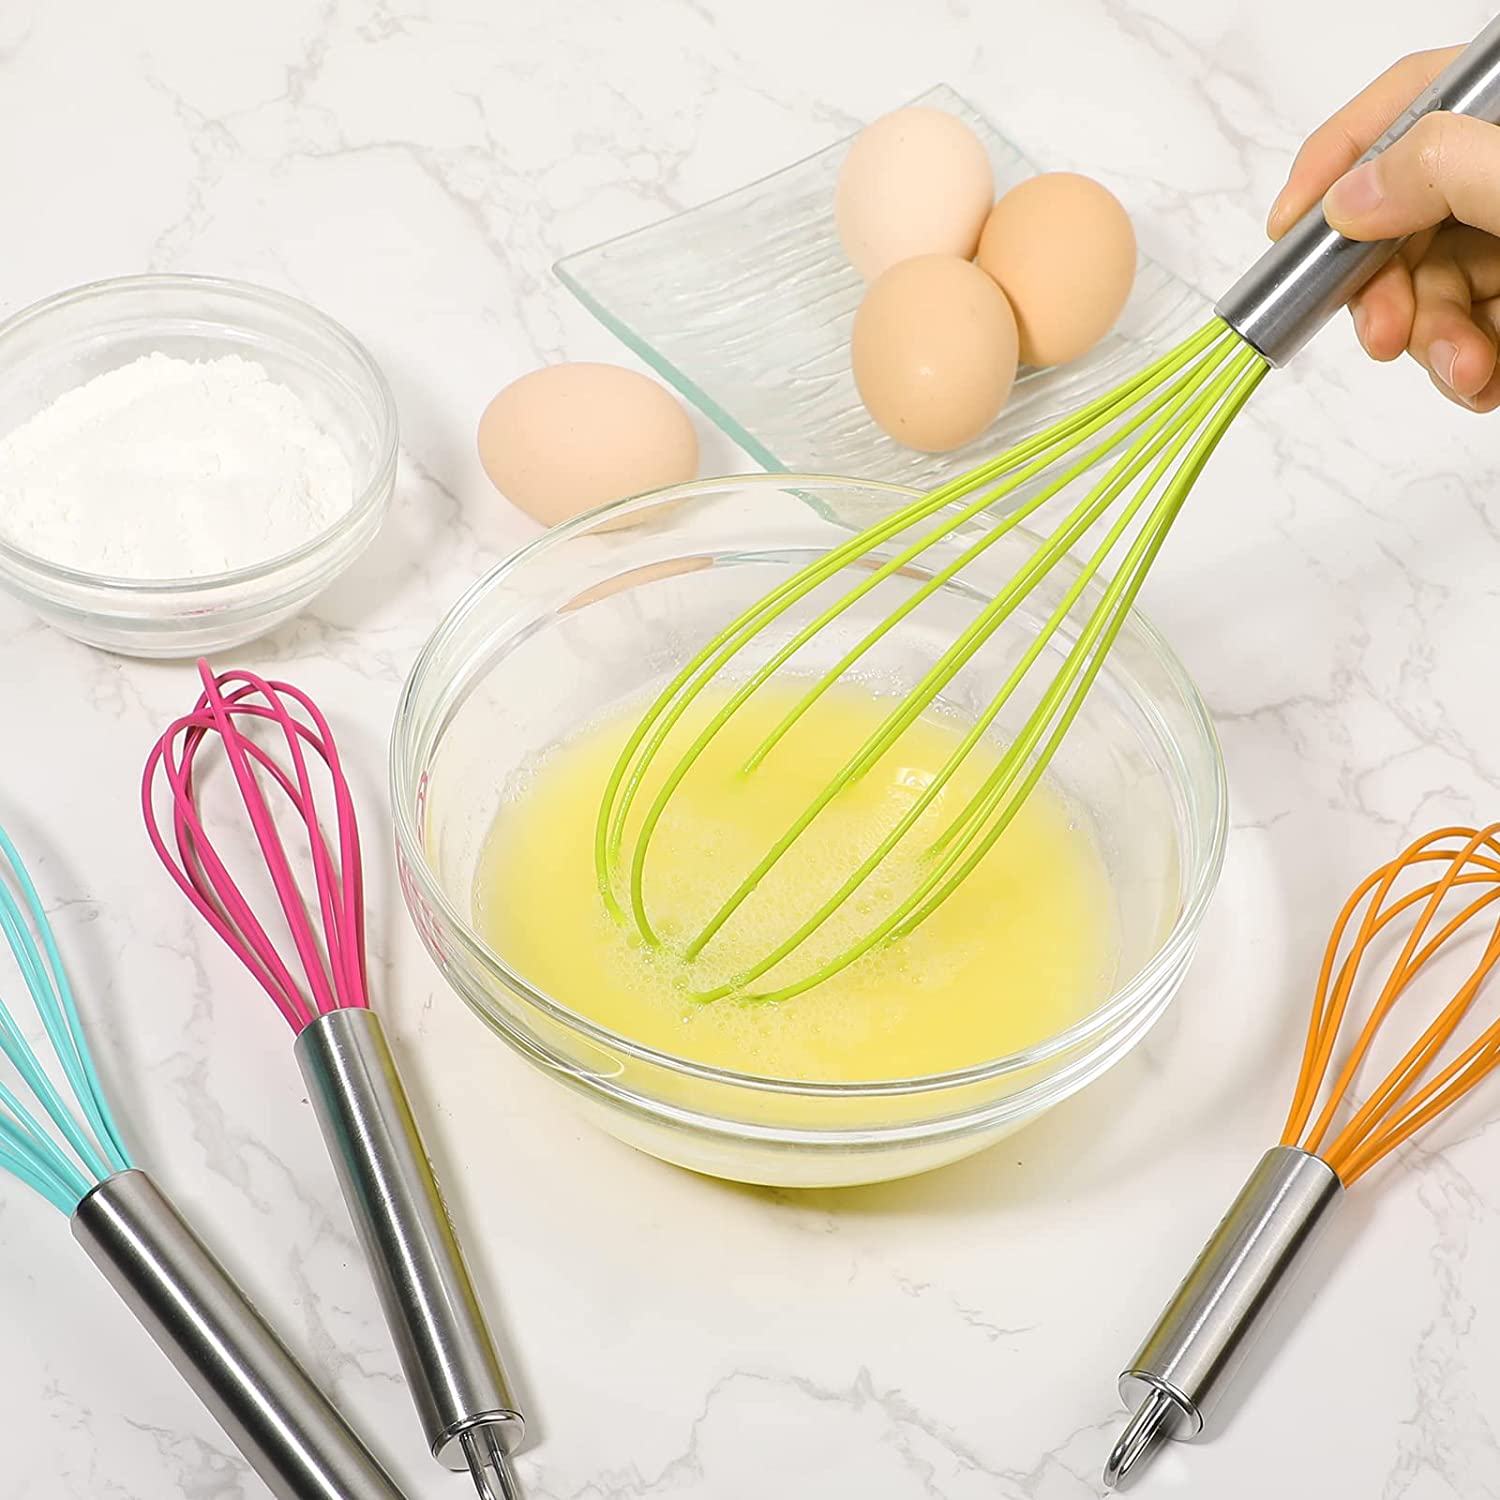 Webake Flat Whisk Set of 3, Silicone Whisk Heat Resistant Kitchen Whisks  for Non-stick Cookware, Egg Beater Perfect for Blending, Whisking, Beating